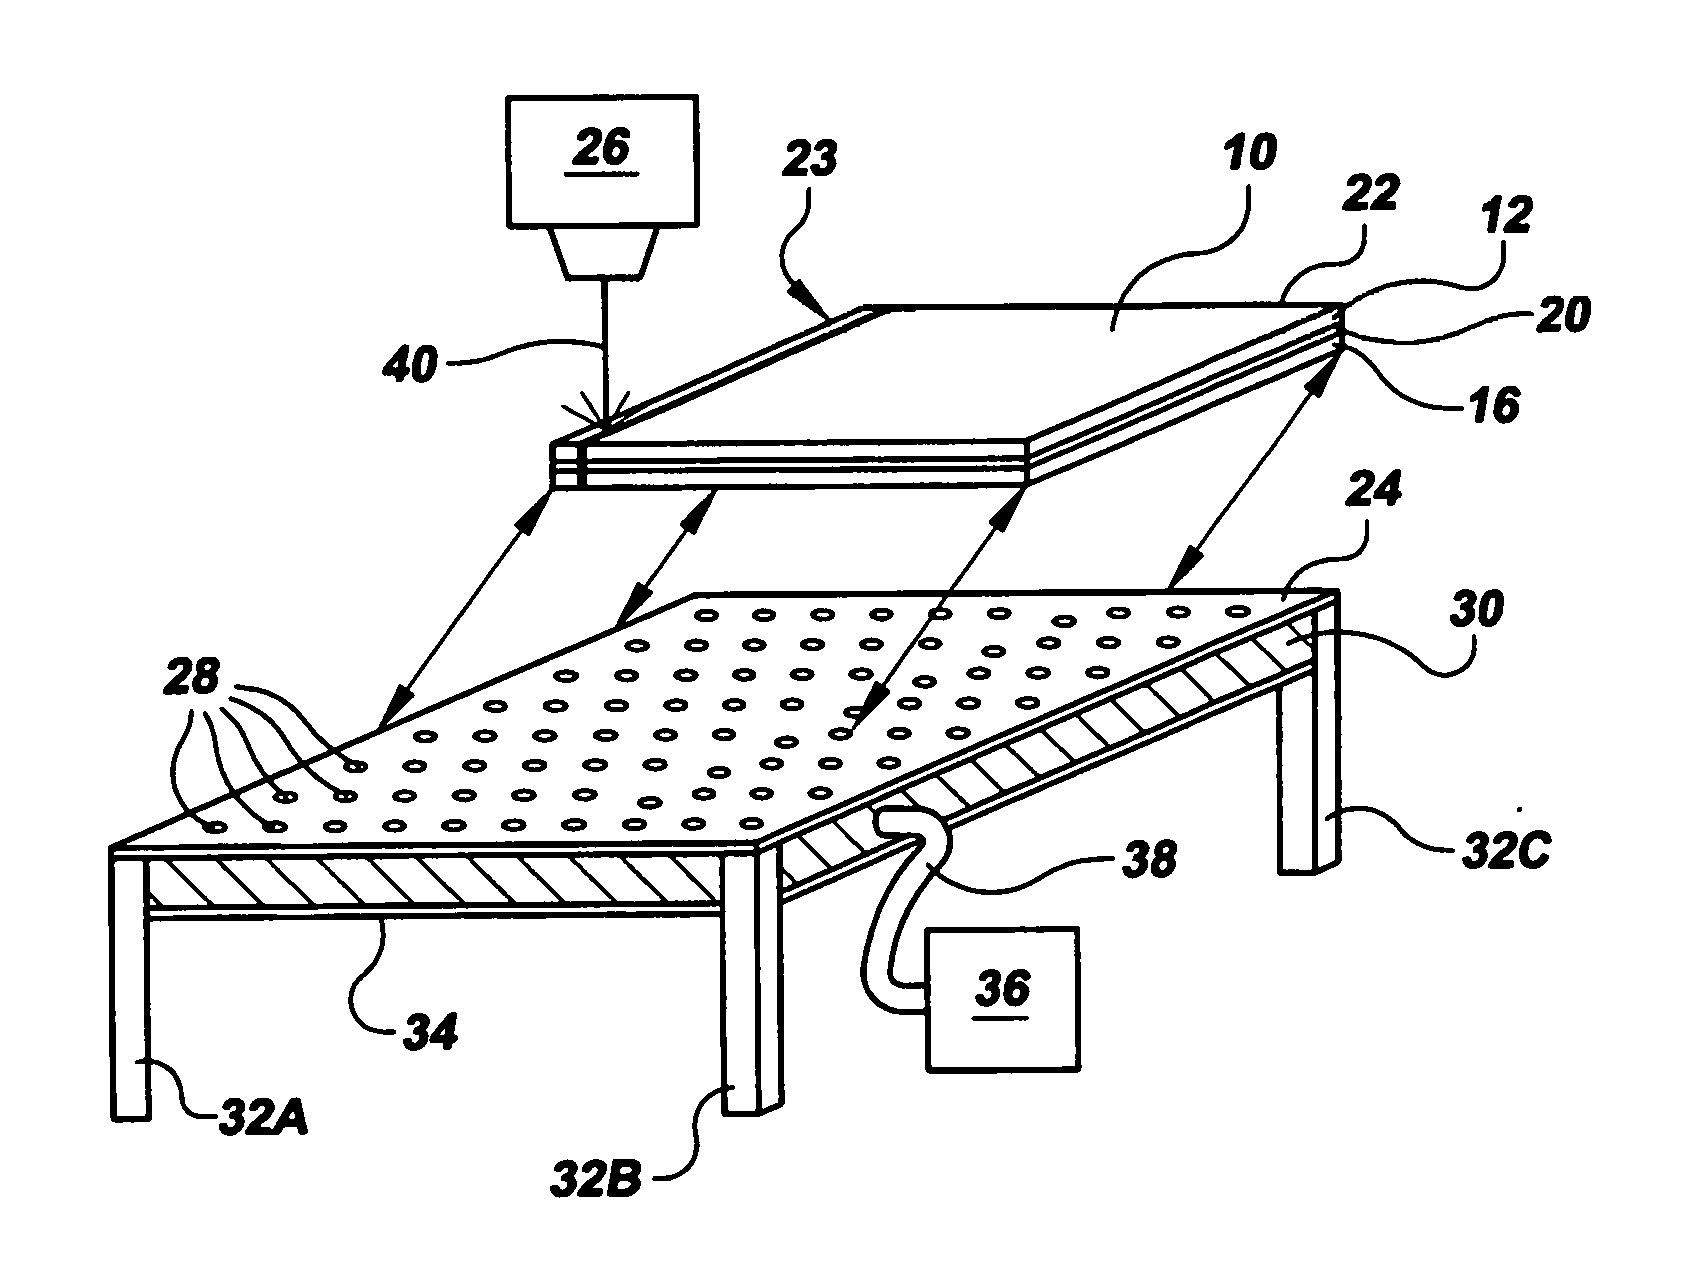 Method of manufacture of a chromogenic panel